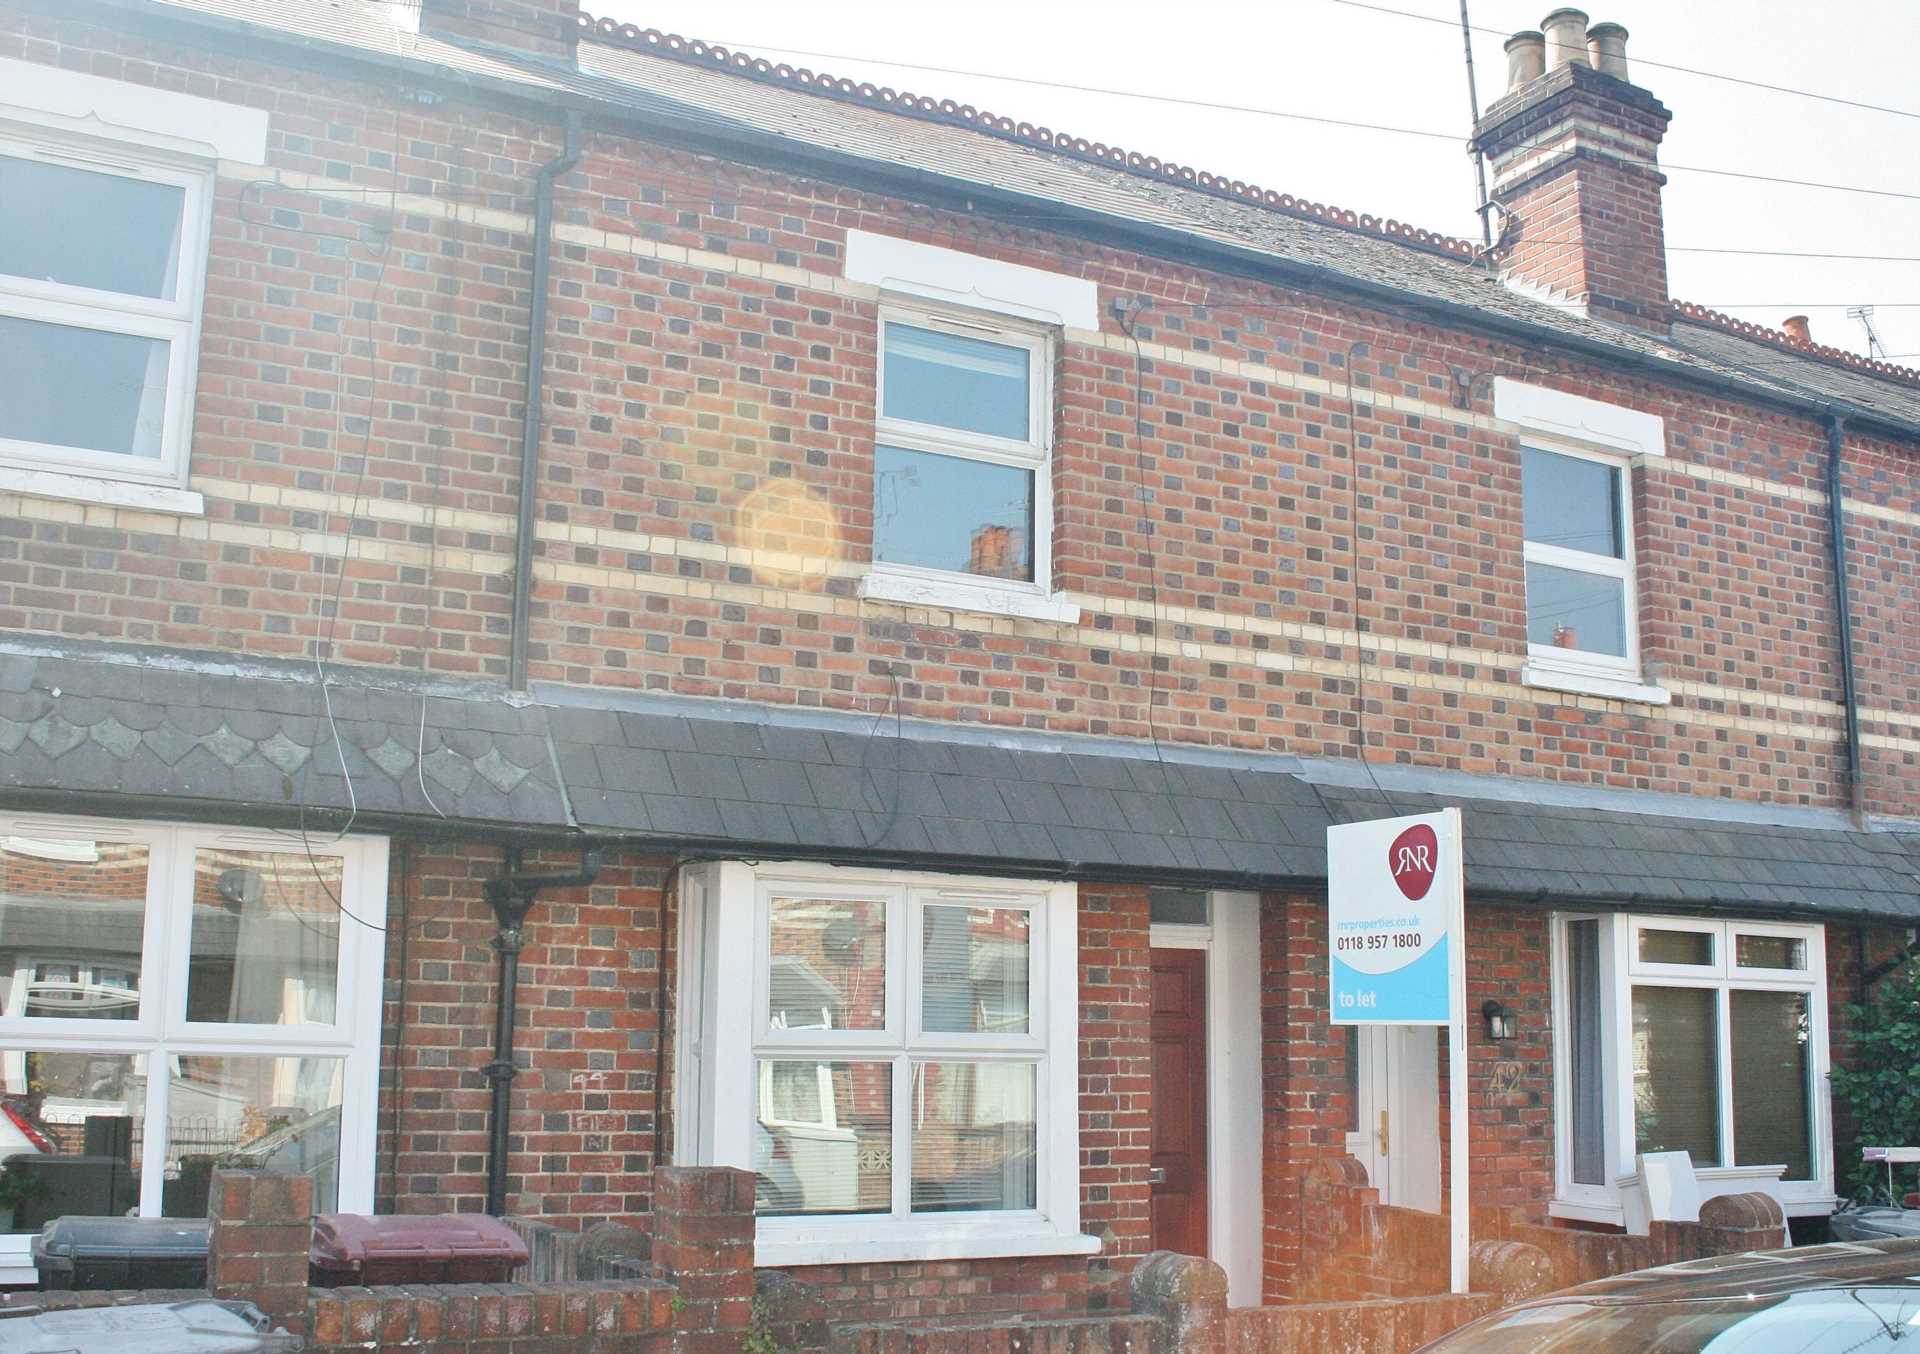 3 Bed- Filey Road, Reading, Image 3